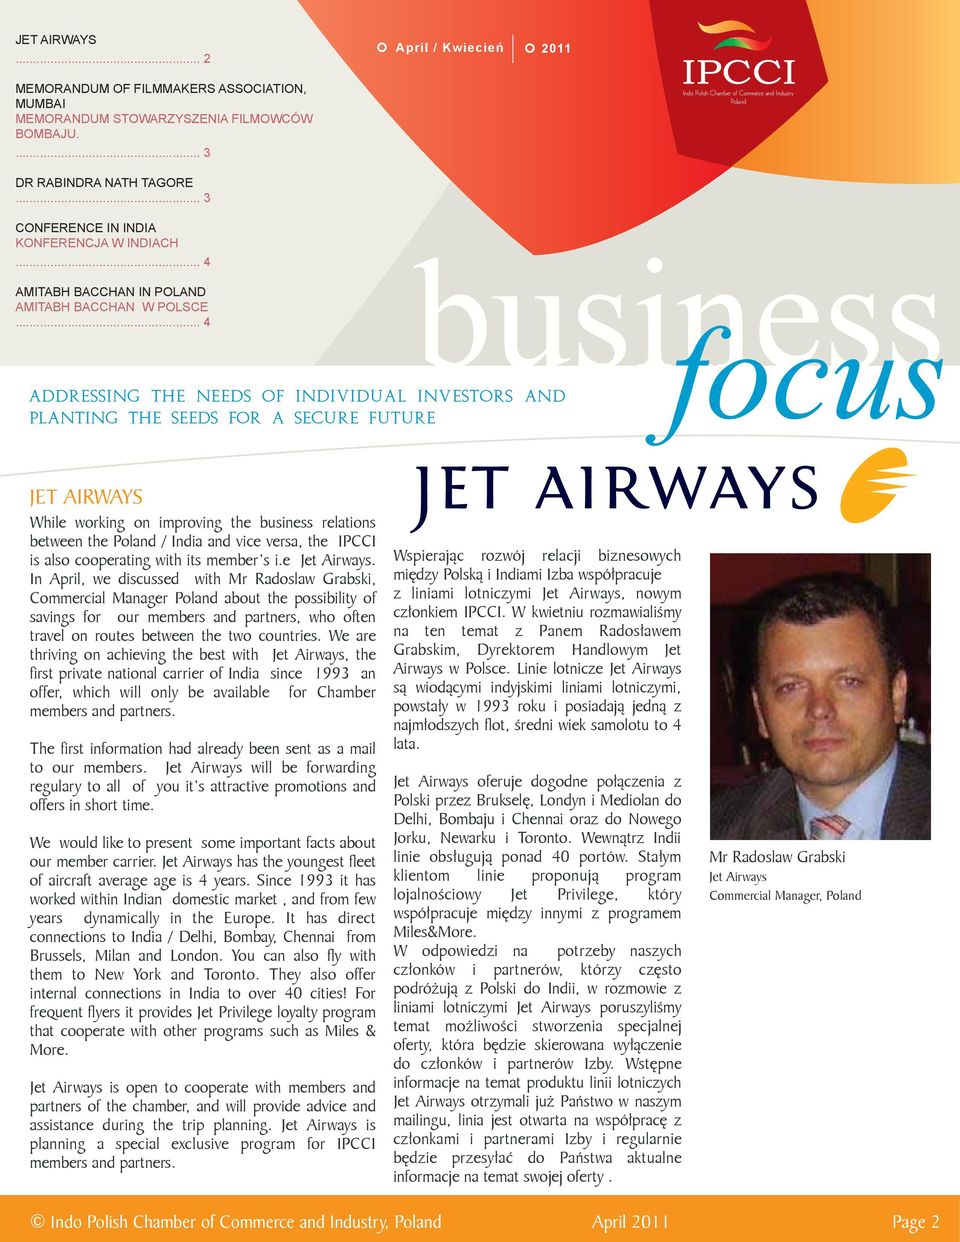 .. 4 ADDRESSING THE NEEDS OF INDIVIDUAL INVESTORS AND PLANTING THE SEEDS FOR A SECURE FUTURE business focus JET AIRWAYS While working on improving the business relations between the Poland / India